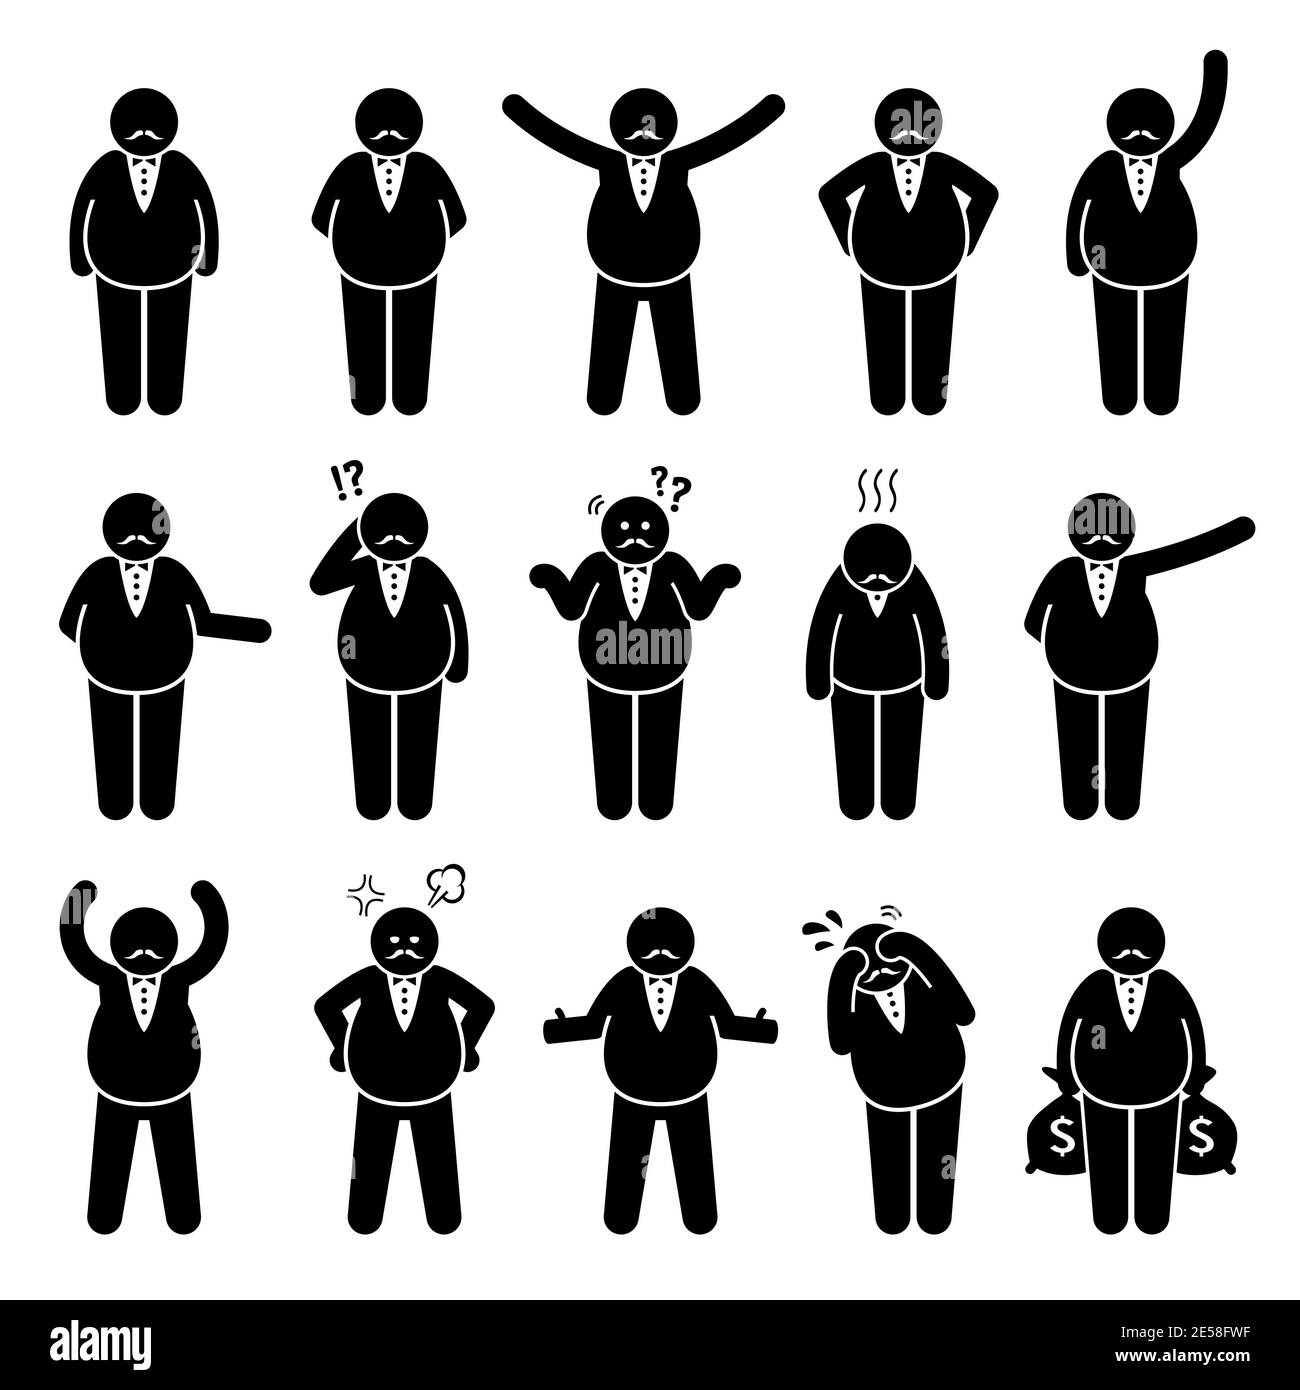 Fat boss or wealthy employer poses and actions stick figures character icon set. Vector illustrations of a fat rich man with different emotions and re Stock Vector